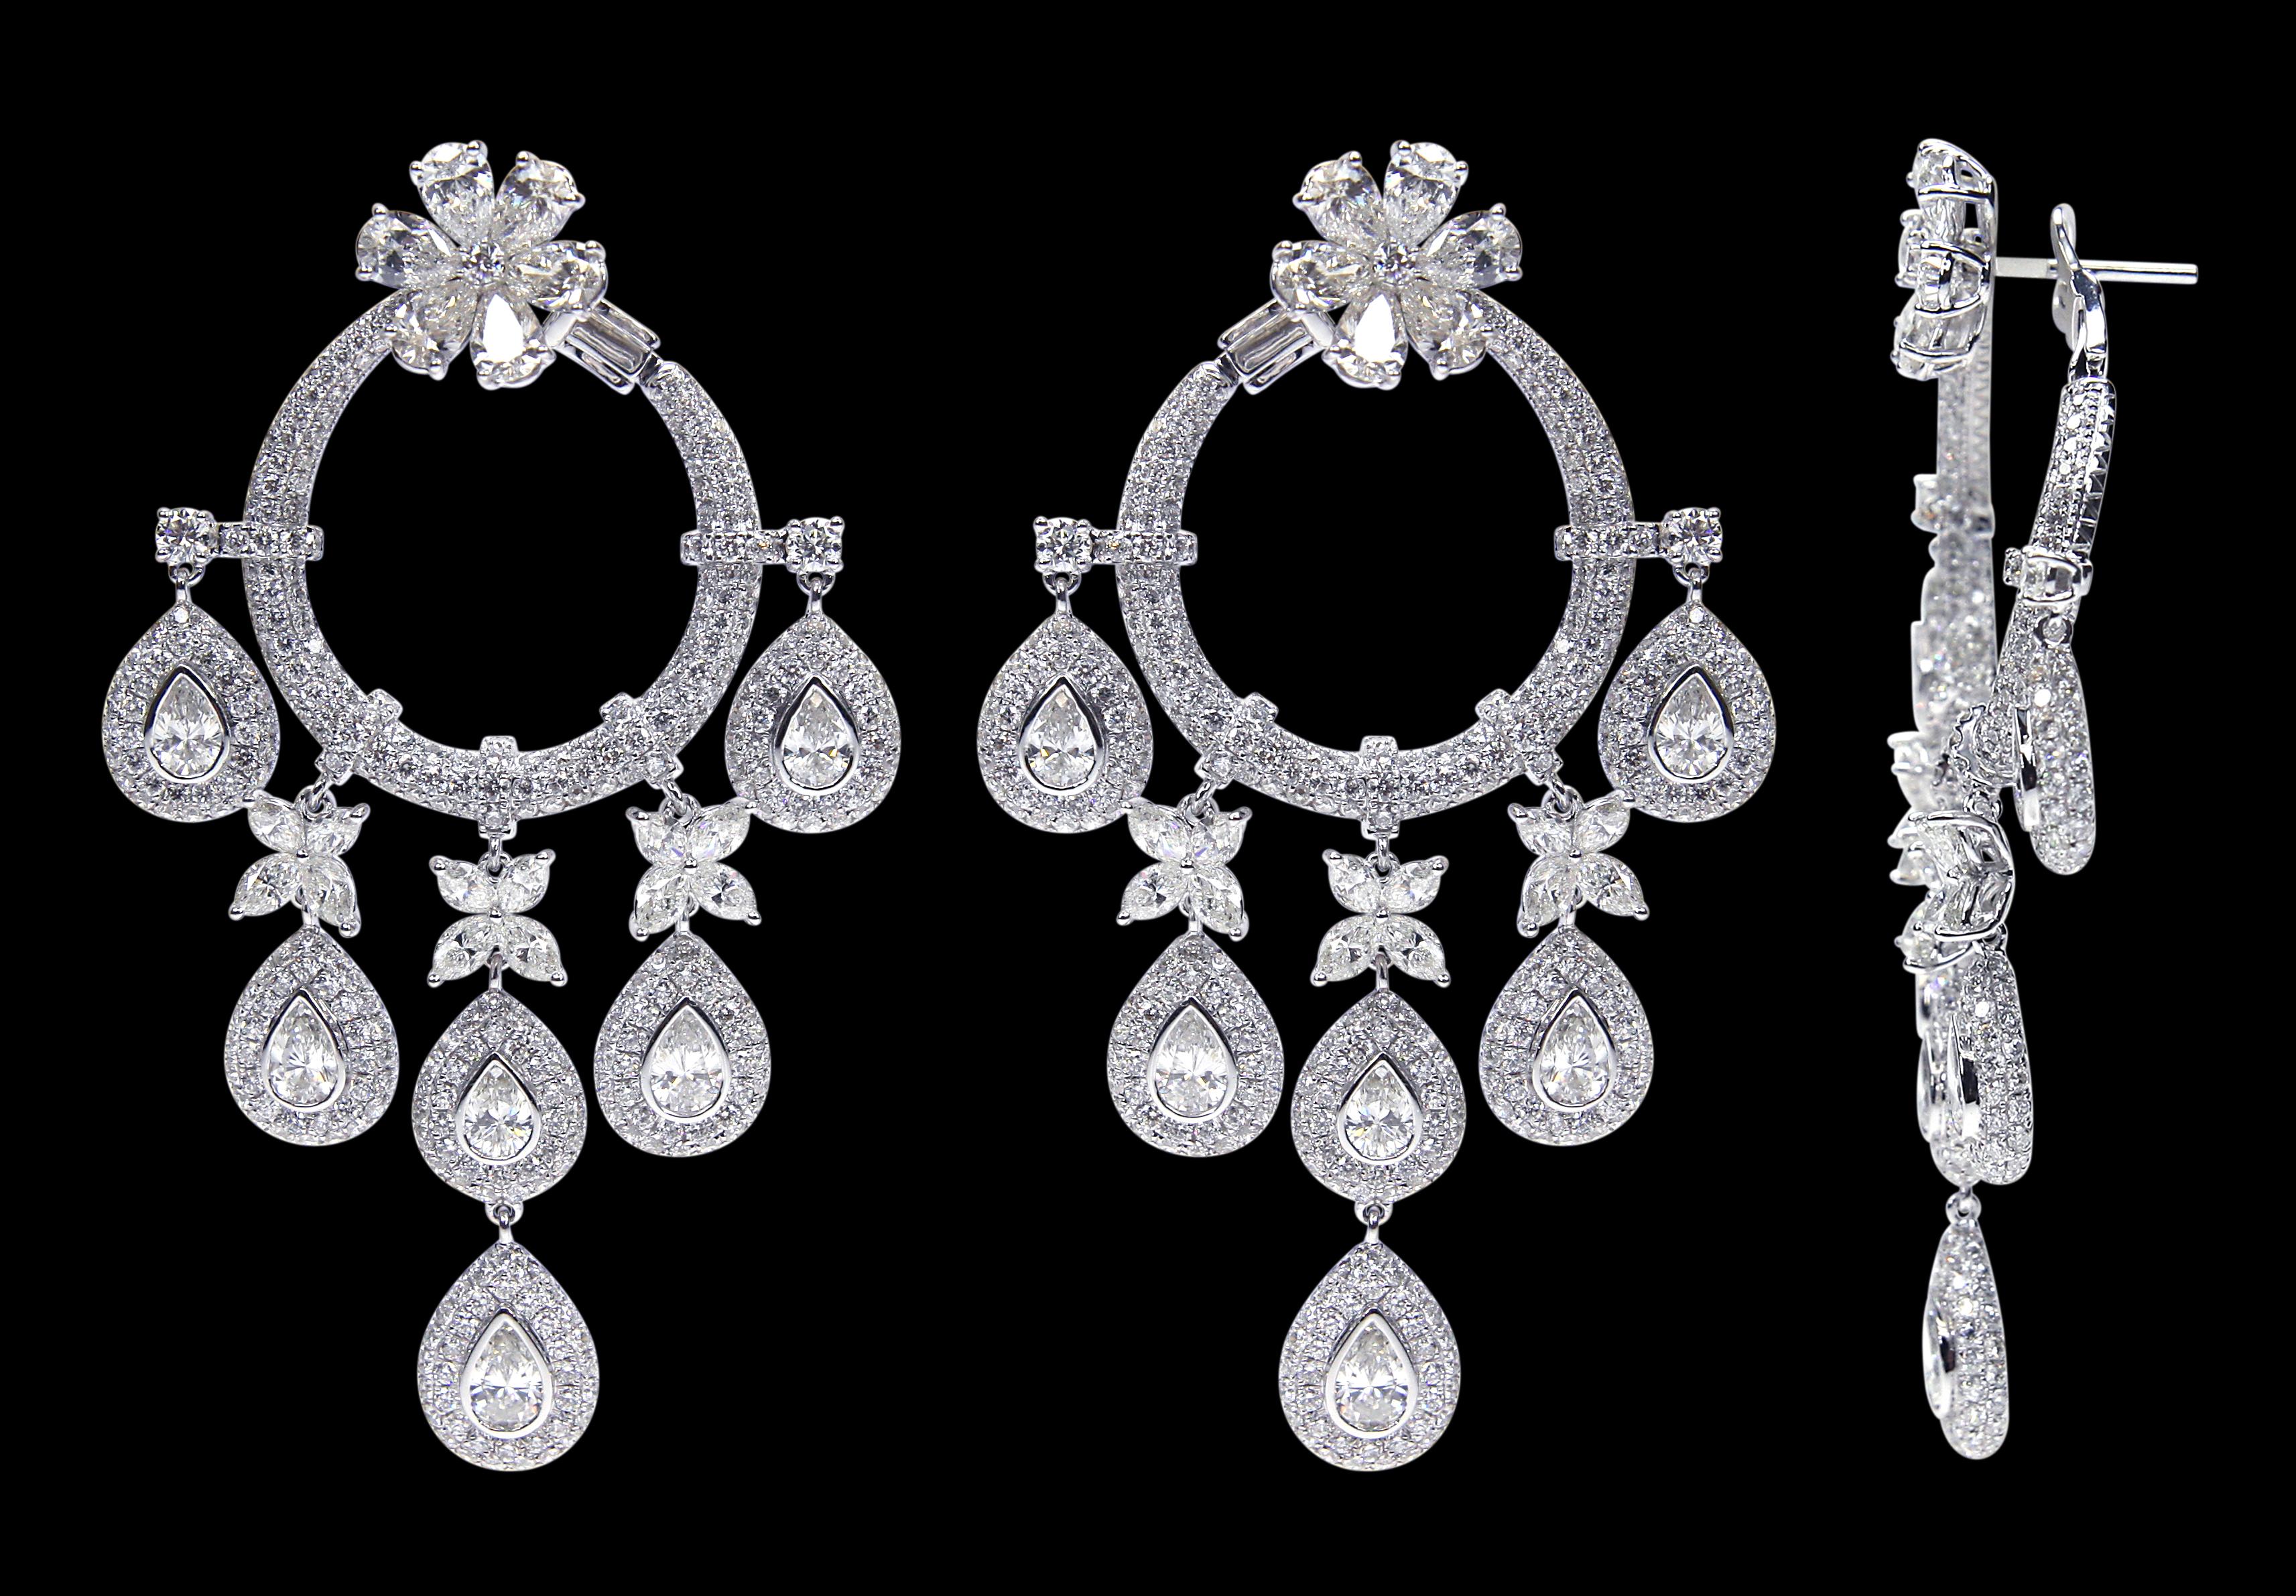 18 Karat White Gold and Diamond Chandelier Earrings.

Diamonds of approximately 14.503 carats and mounted on 18 karats white gold earrings. The earrings weigh approximately 18.429 grams.

Please note: The charges specified do not include any